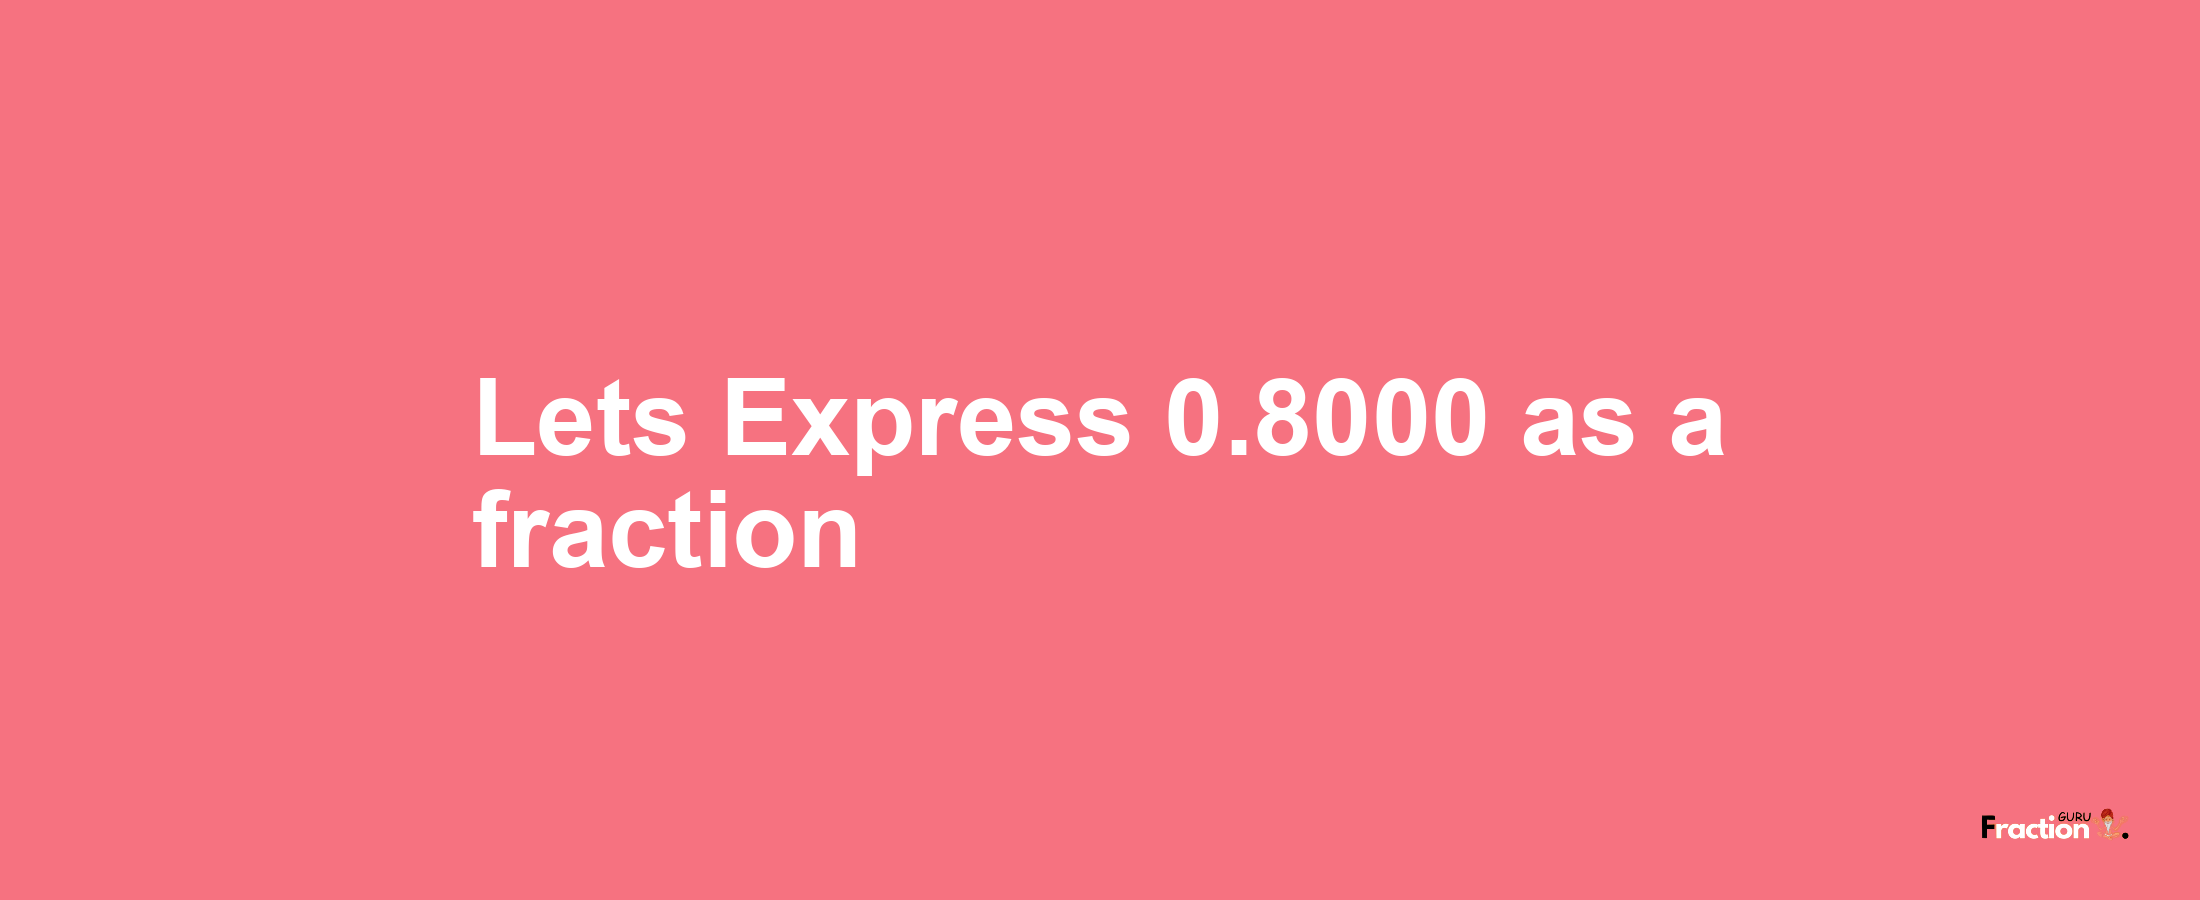 Lets Express 0.8000 as afraction